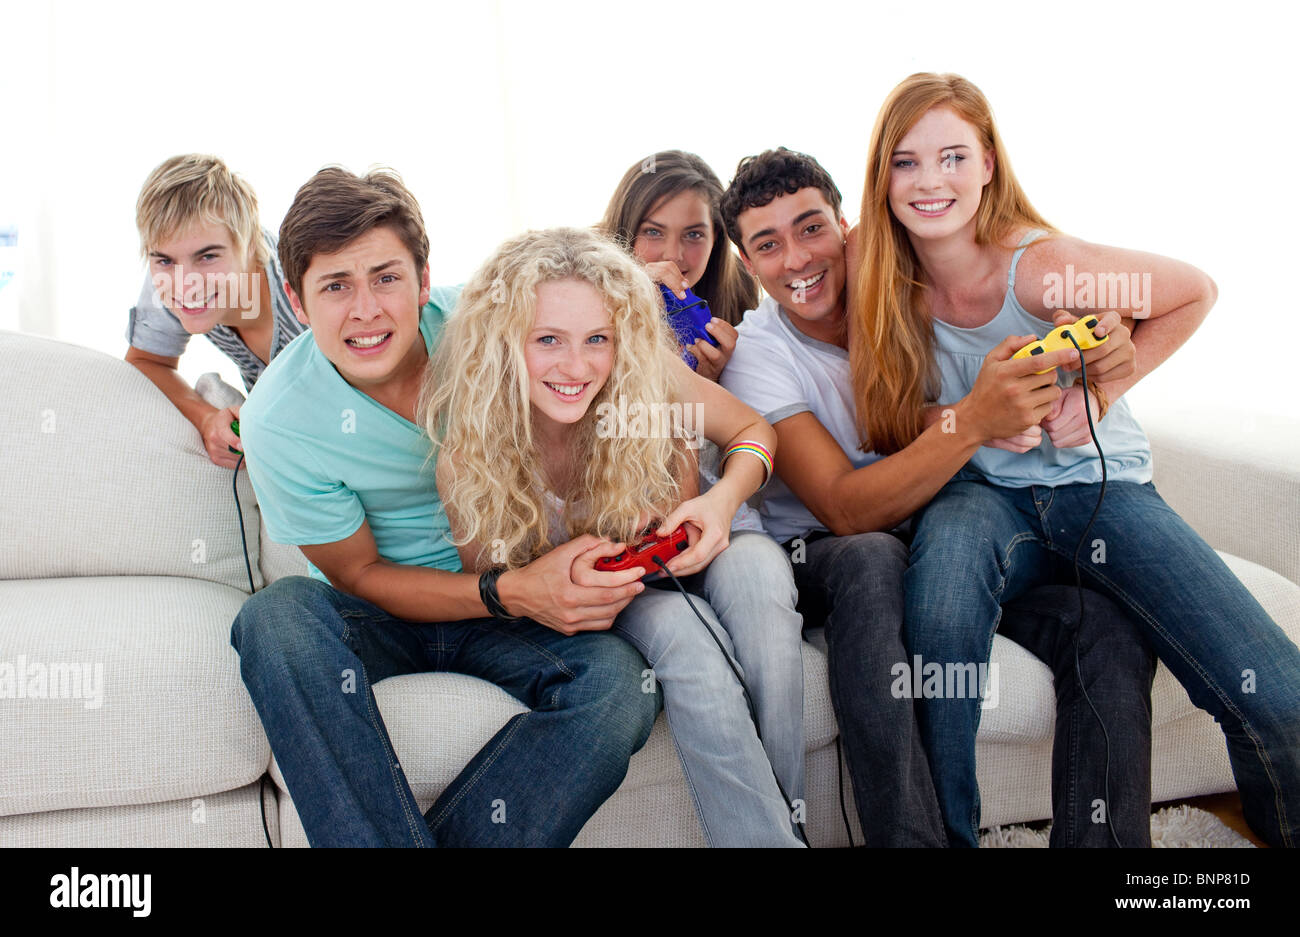 Teenagers playing video games at home Stock Photo - Alamy